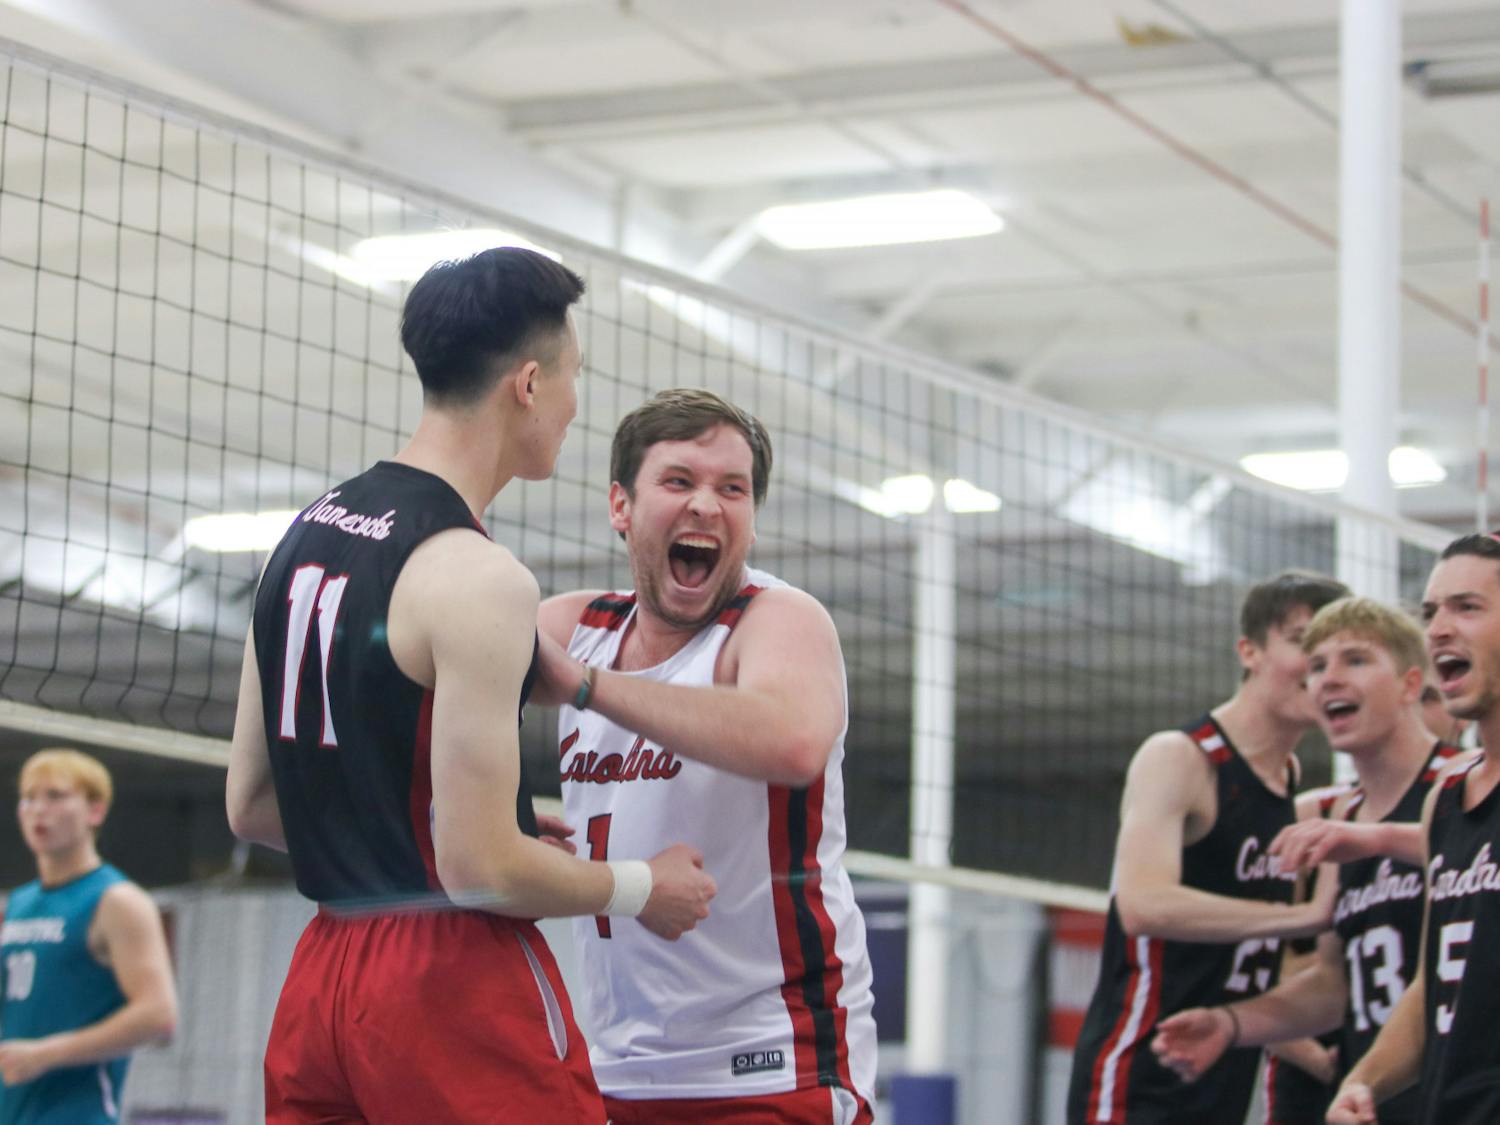 Senior libero Patrick Ertel celebrates a major kill from senior outside Steven Cao alongside players of the Garnet team. Ertel had a particularly notable game against Coastal Carolina A, making key saves for the Garnet team to keep them alive in the match.&nbsp;